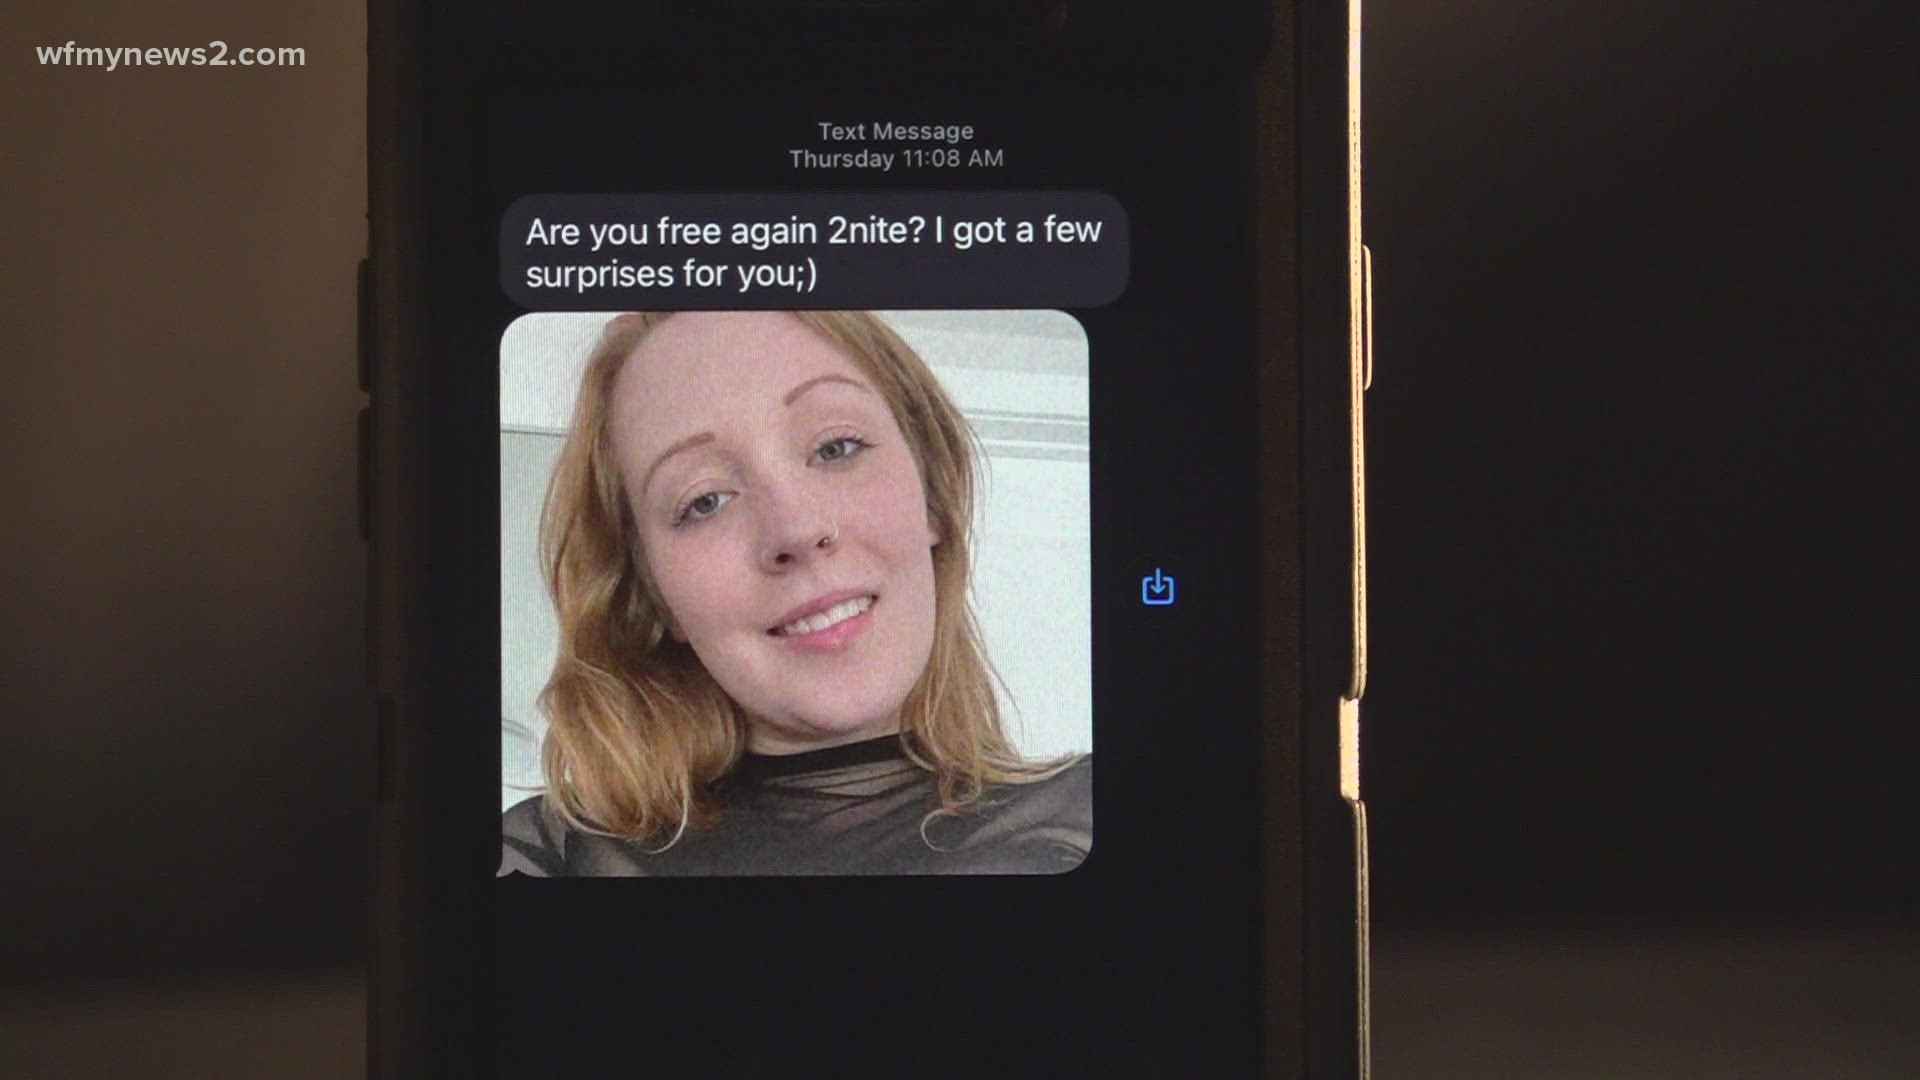 Spam Sex Videos - More people receive spam text with vulgar messages | wfmynews2.com